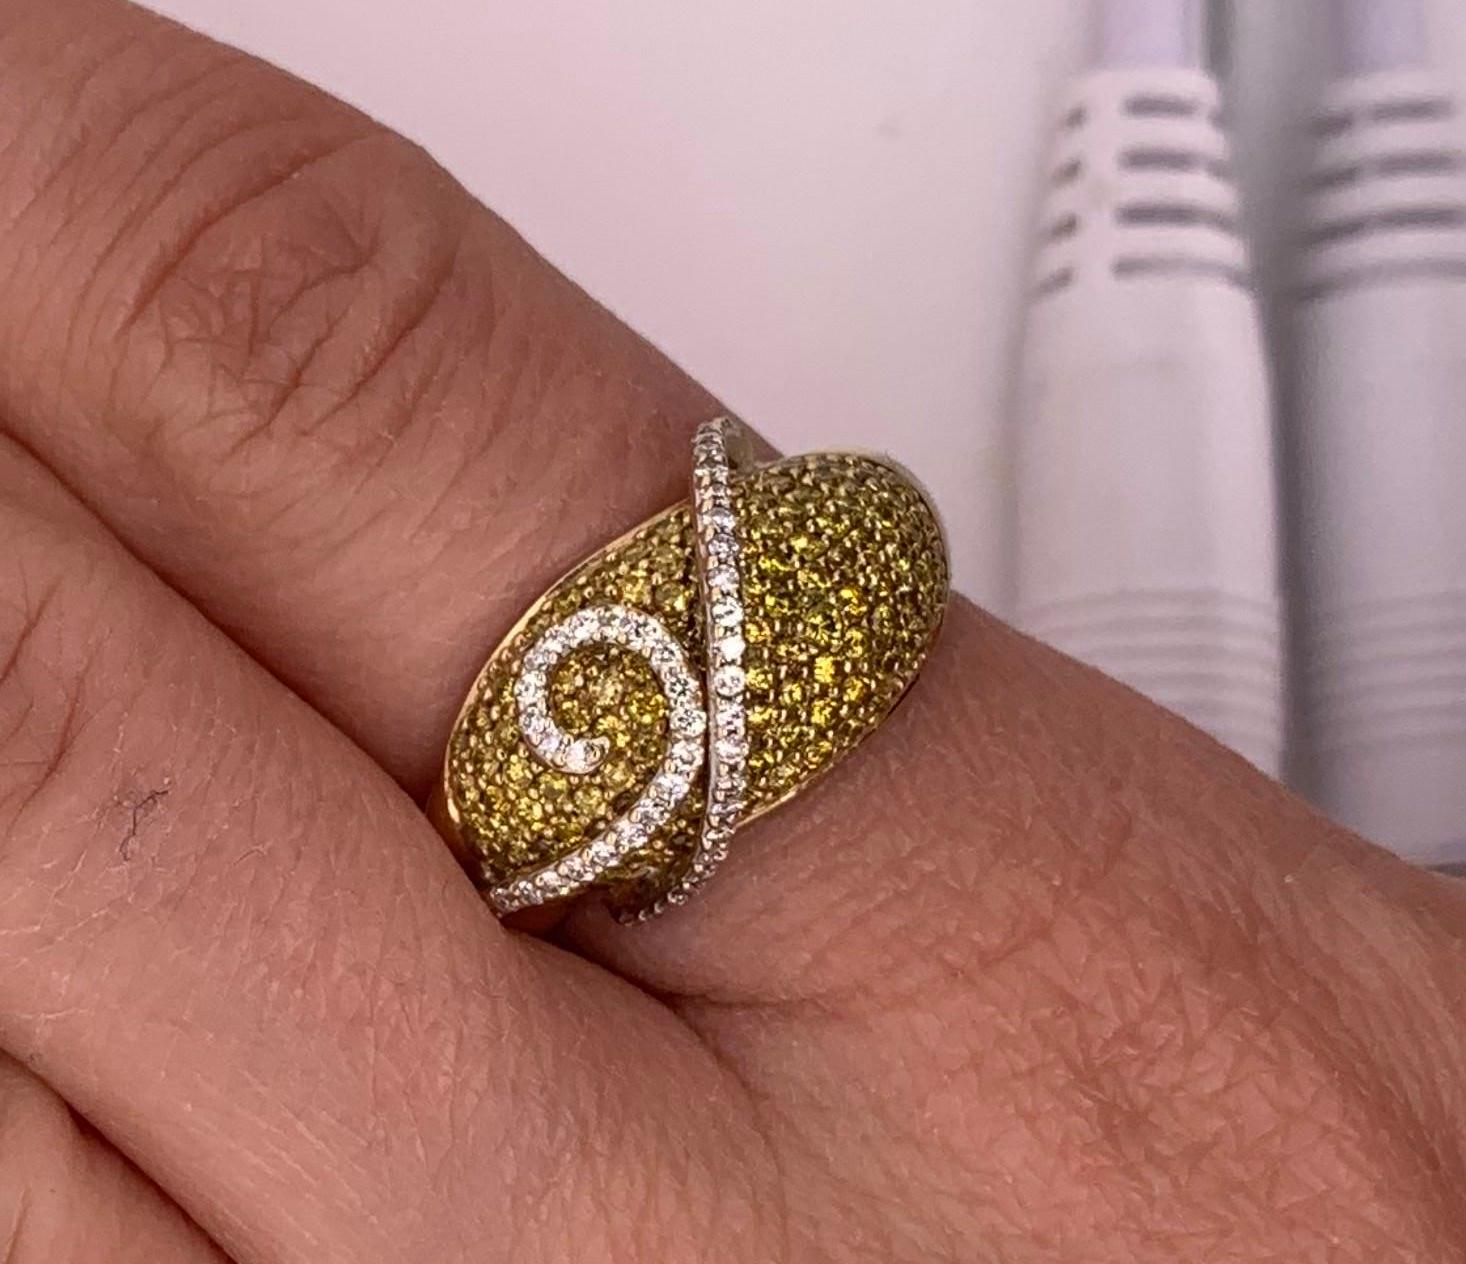 Material: 14k Yellow Gold 
Diamonds: Brilliant Round Yellow Diamonds at 0.85 Carats- SI Clarity 
Diamond Details: Brilliant Round White Diamonds at 0.15 Carats. SI Clarity / H-I Color. 
Ring Size: 7.75. Alberto offers complimentary sizing on all